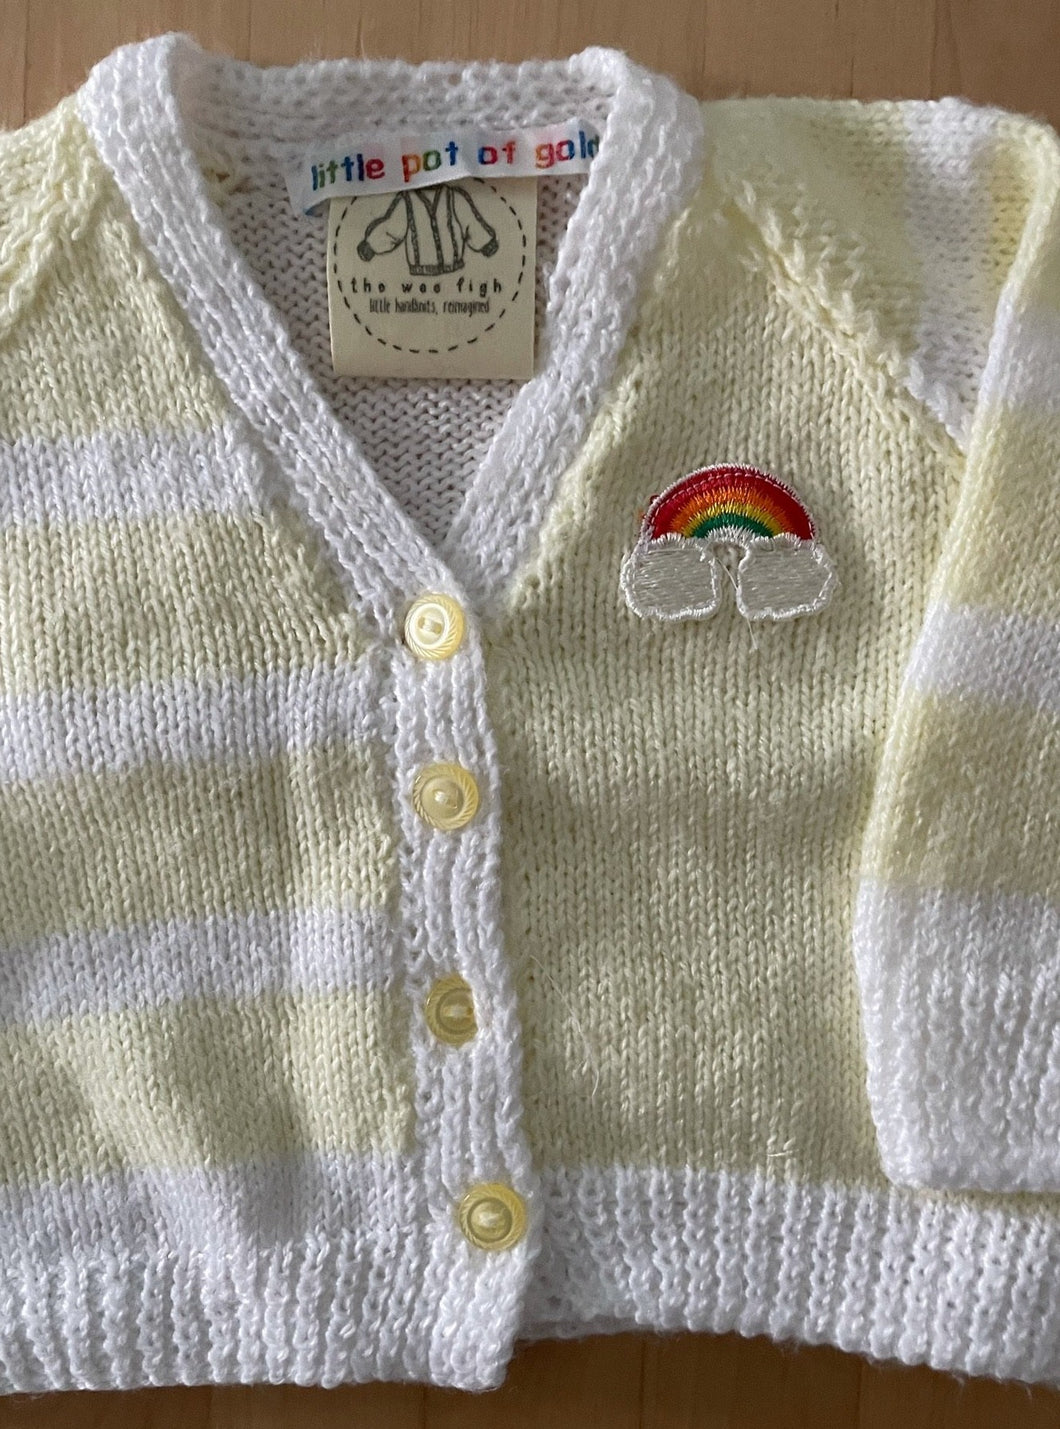 0-3 months - Yellow and white striped rainbow cardigan